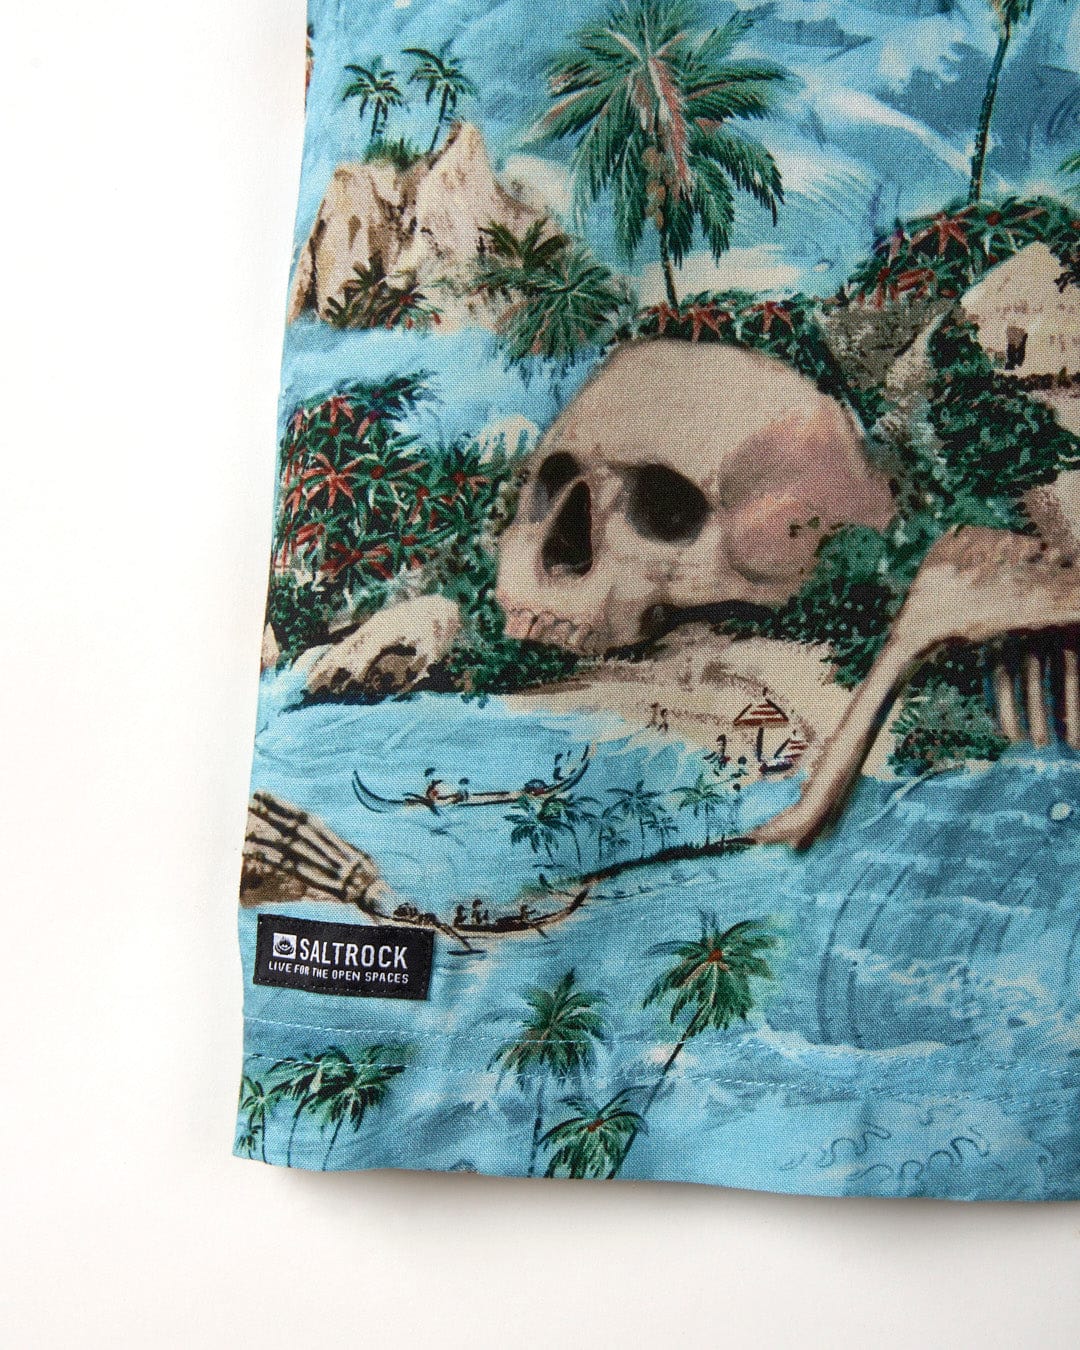 A close-up of a Hawaiian Isle - Mens Short Sleeve Shirt in Blue branded by Saltrock, featuring a tropical scene with palm trees, mountains, skull island print, and small figures on a blue background.